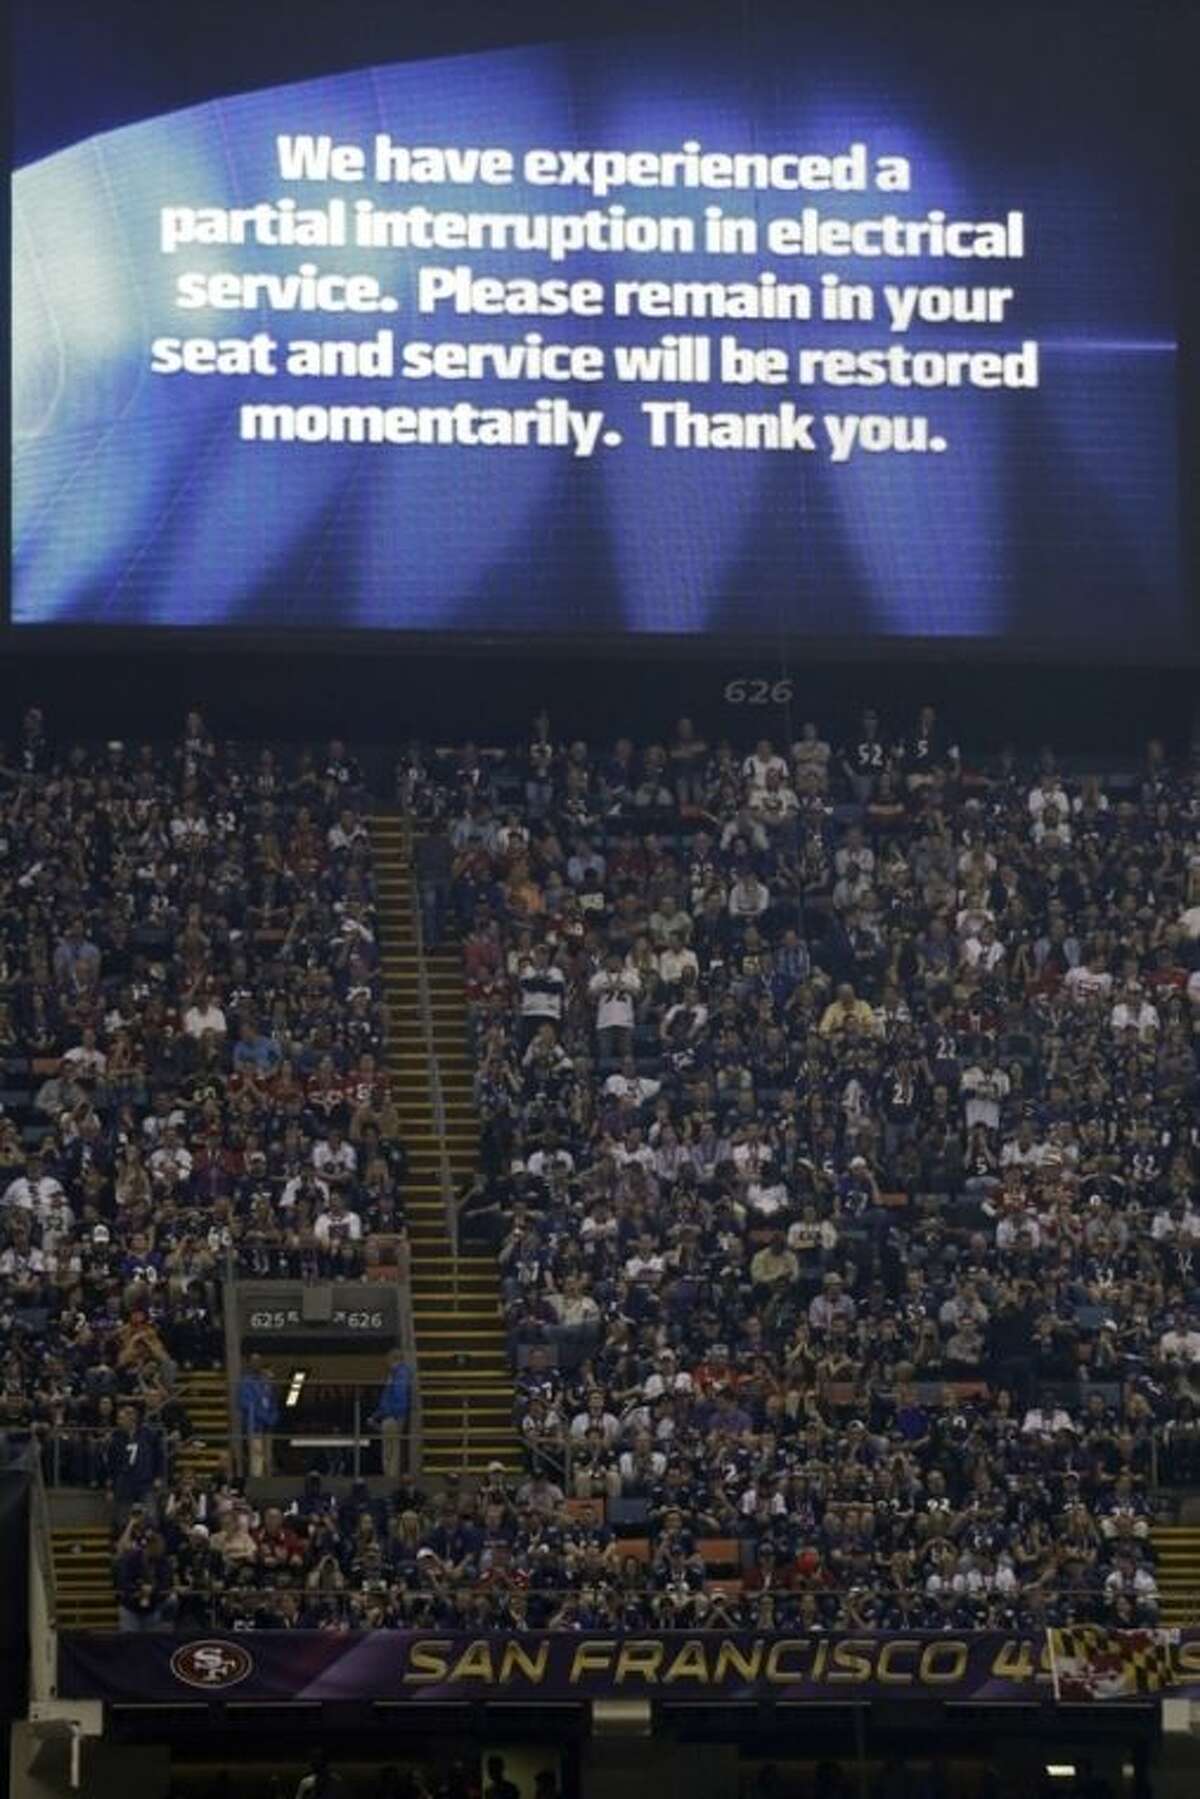 A power failure advisory appears on a screen at the Superdome during the second half of the NFL Super Bowl XLVII football game between the San Francisco 49ers and the Baltimore Ravens, Sunday, Feb. 3, 2013, in New Orleans. The power failure delayed the game by more than 30 minutes. (AP Photo/Marcio Sanchez)